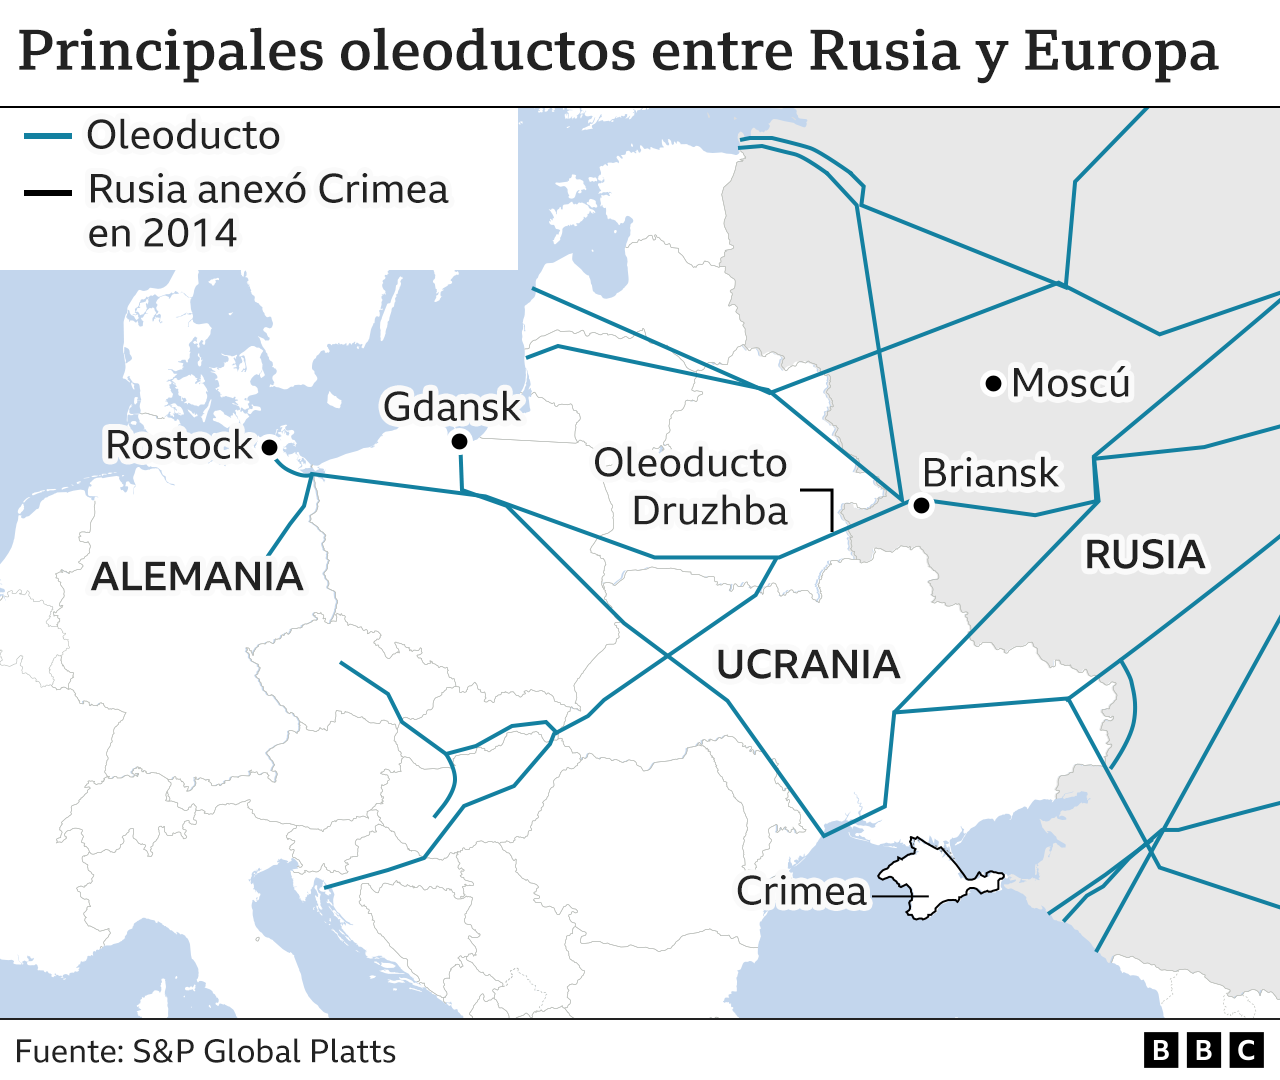 Map of main oil pipelines between Russia and Europe.